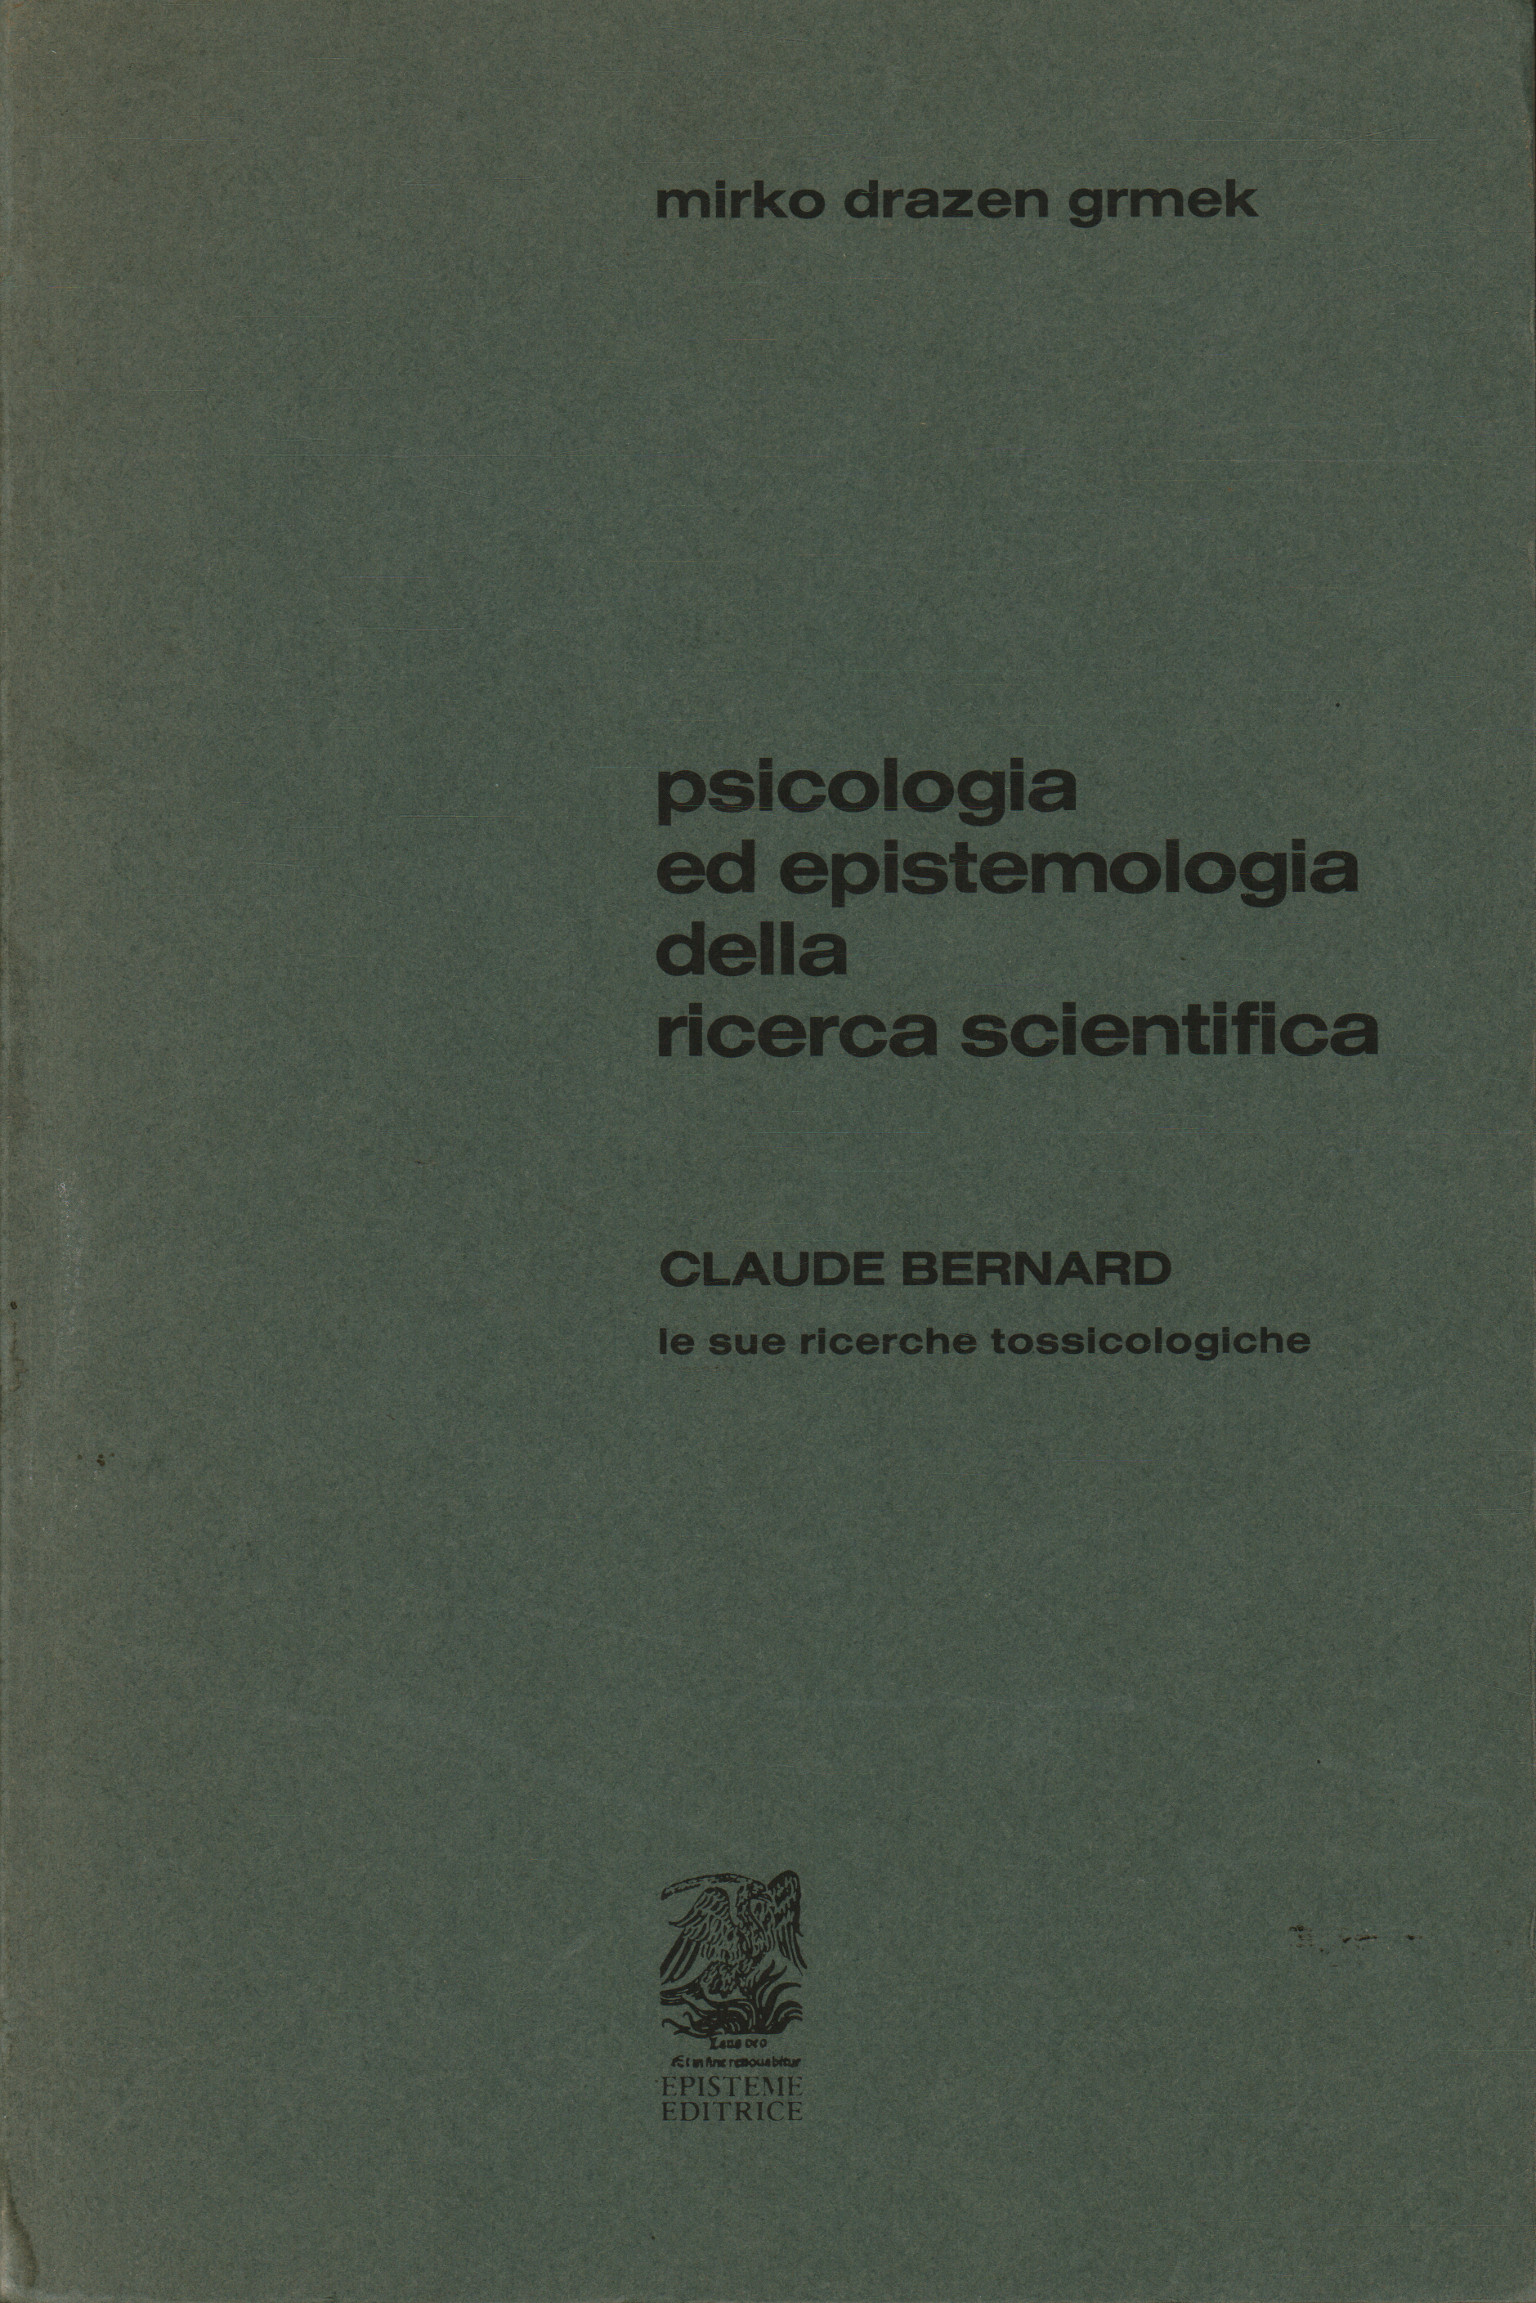 Research psychology and epistemology%